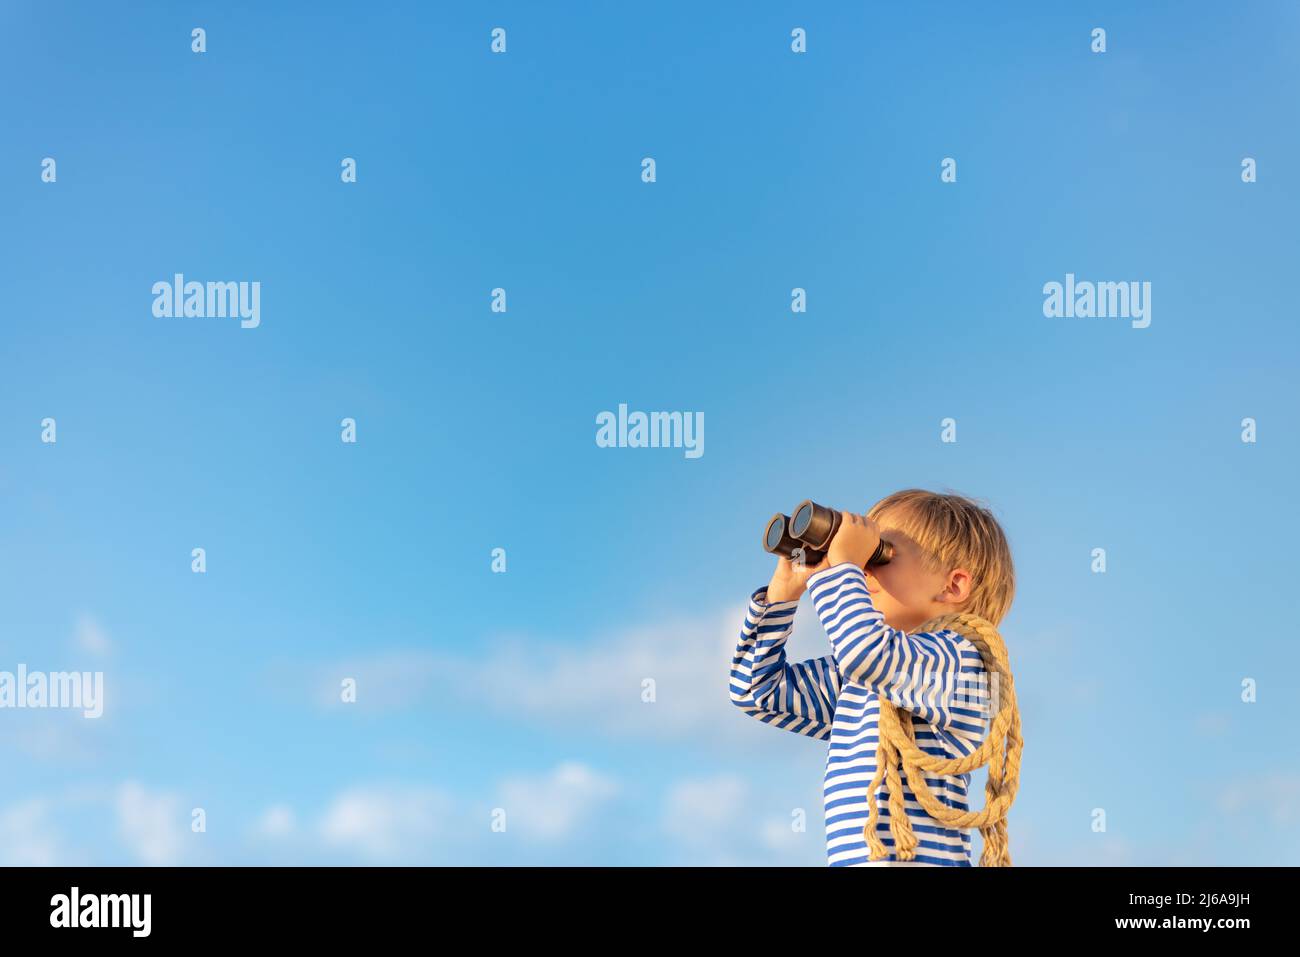 Happy child looking through vintage binoculars against blue sky. Kid having fun in summer. Imagination and freedom concept. Stock Photo